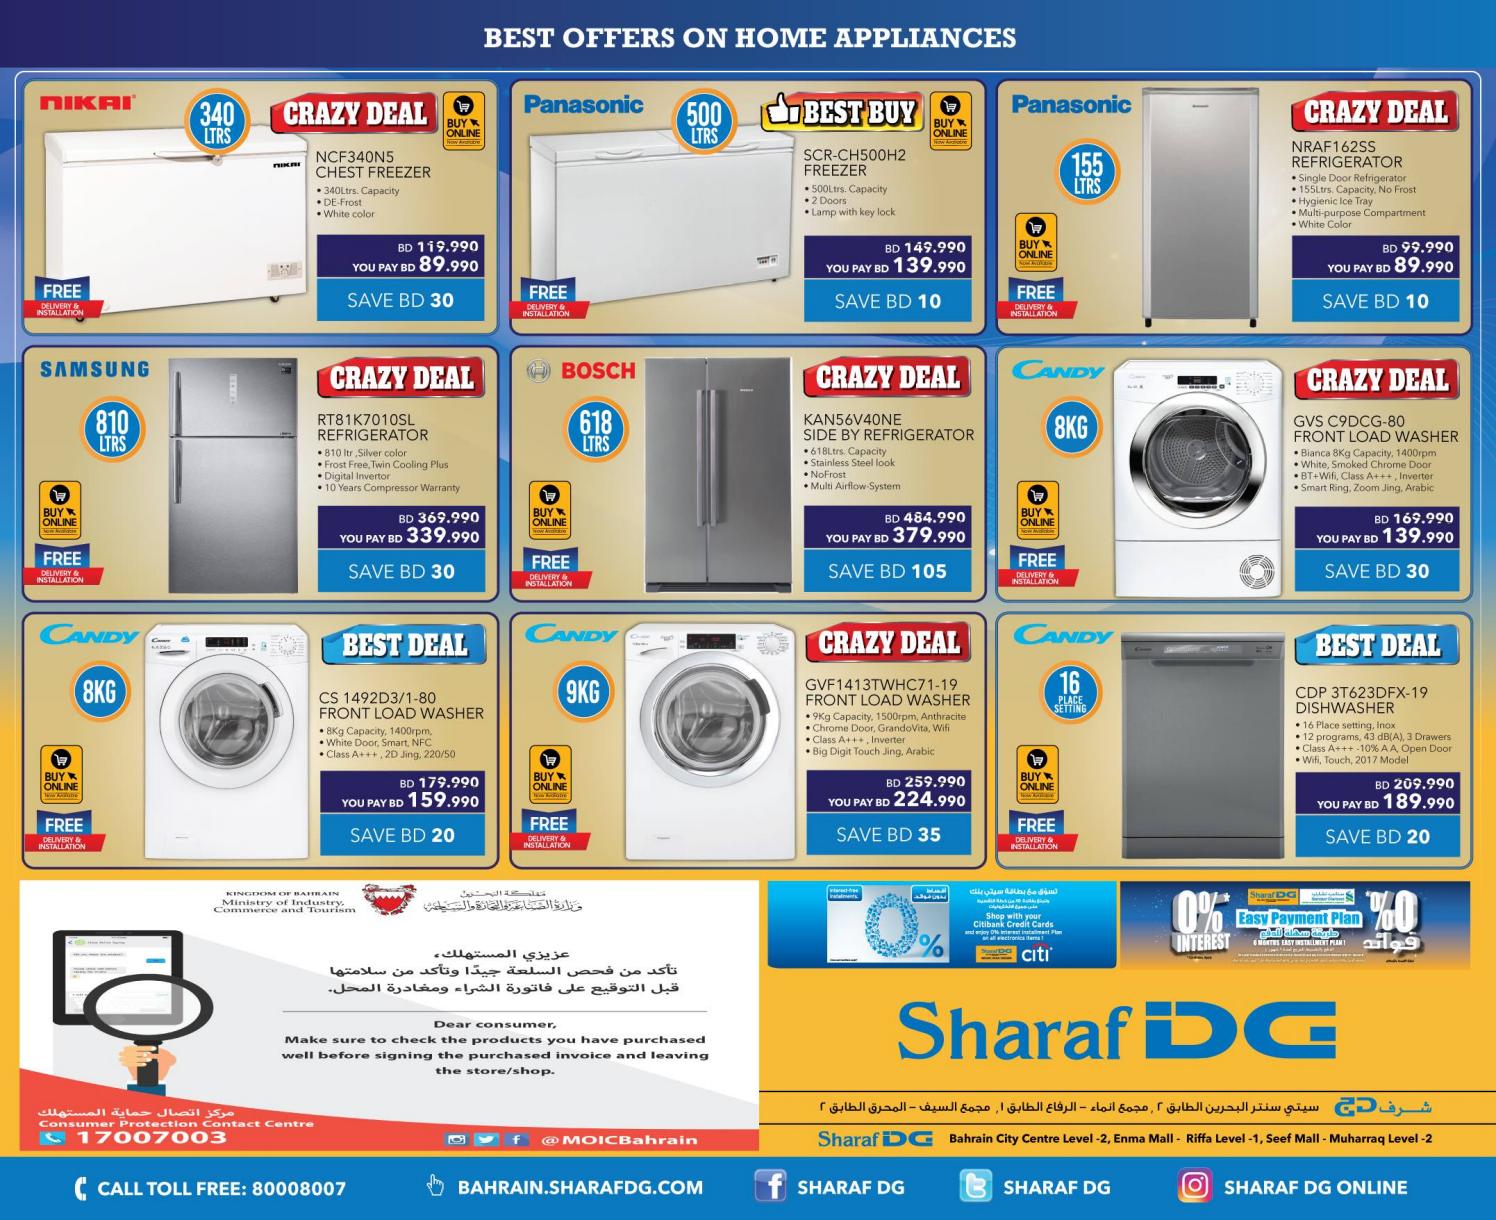 Cool fest best offers on home appliances